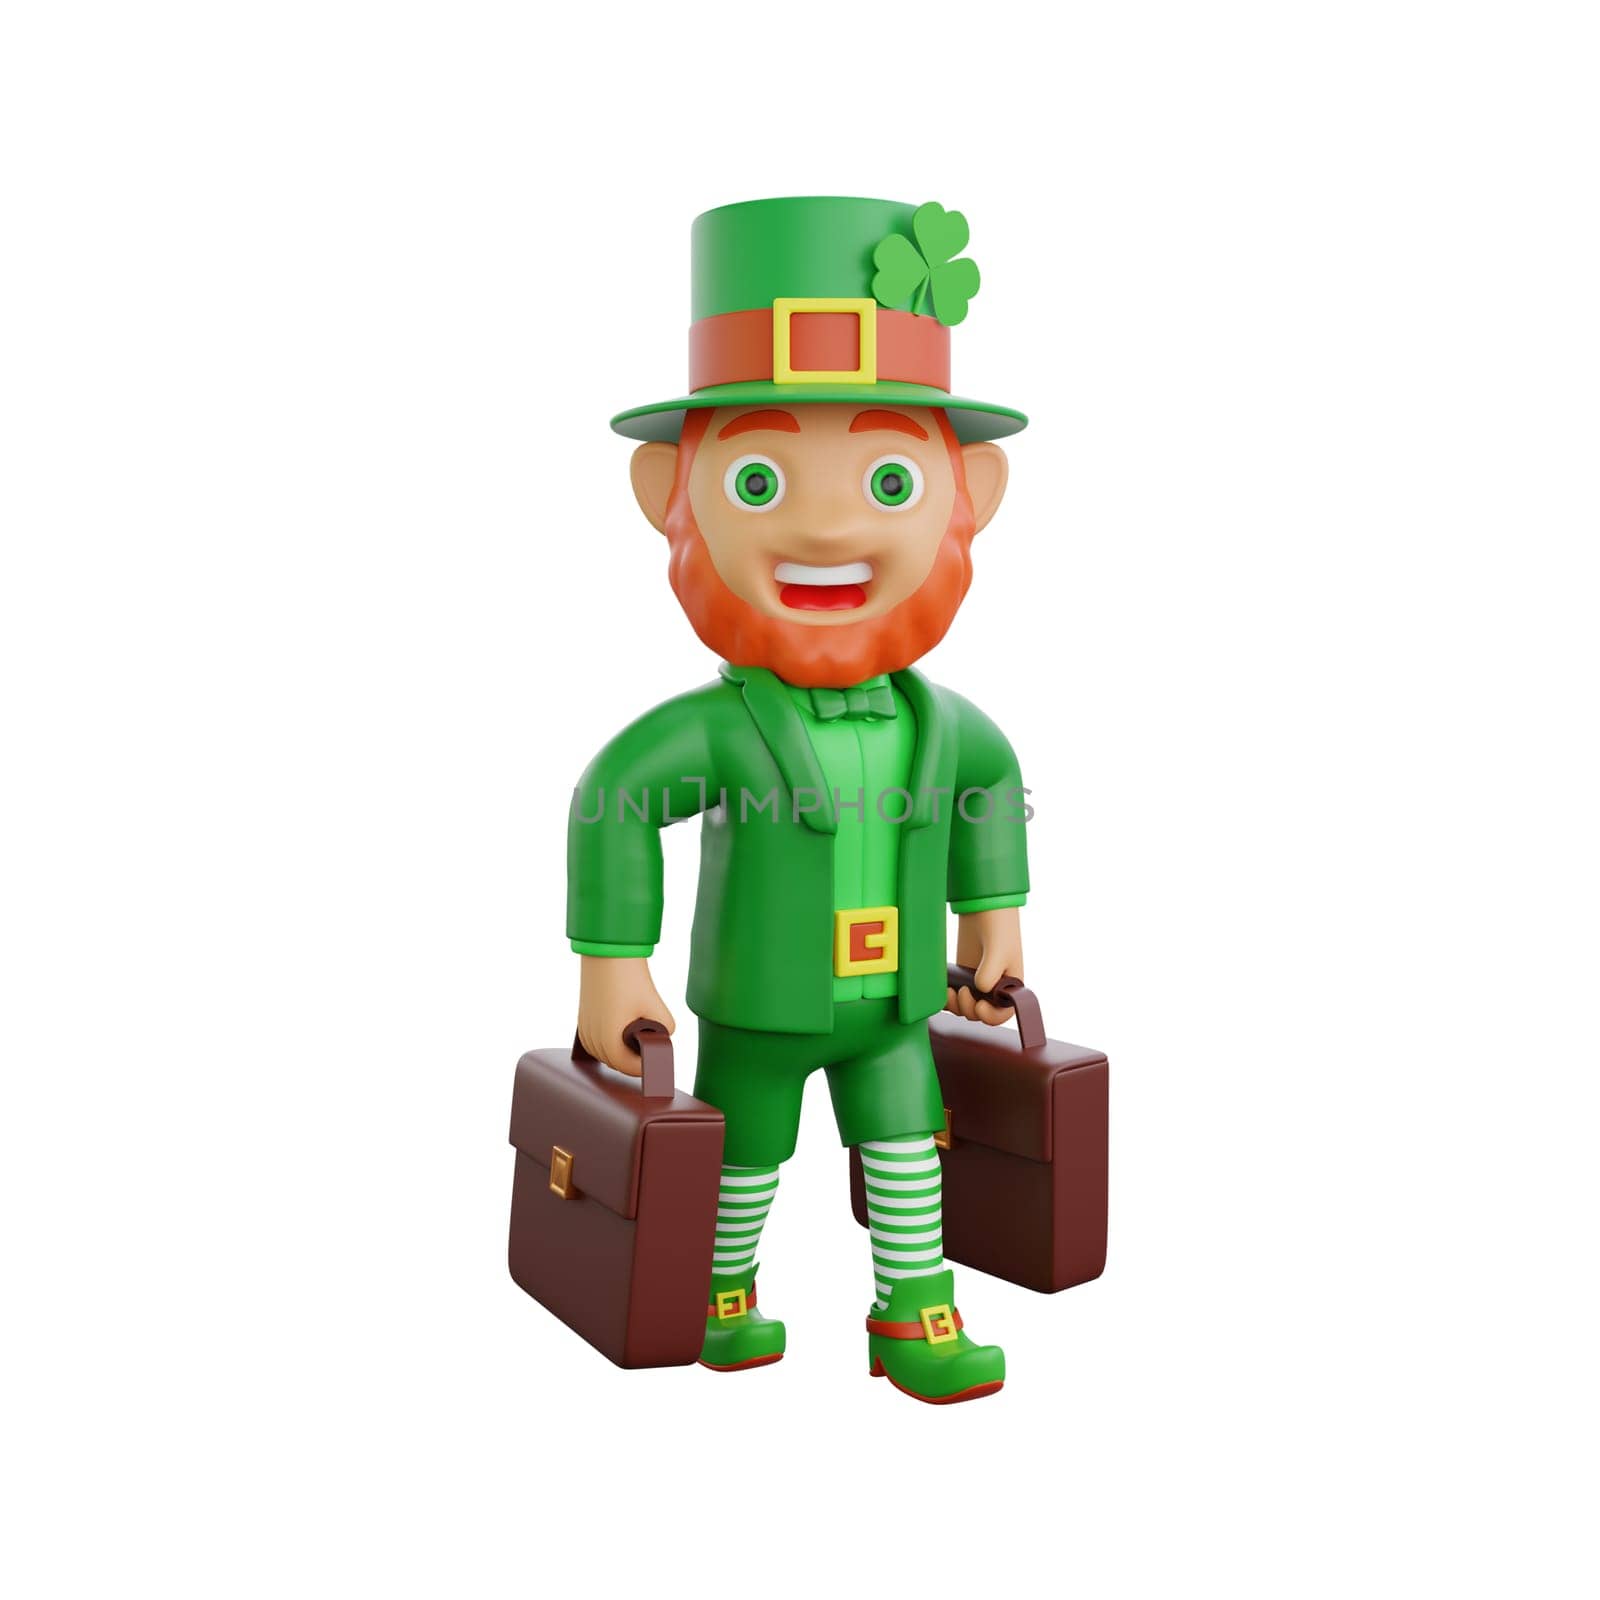 3D illustration of a cheerful leprechaun holding two briefcases, perfect for St. Patrick's Day themed projects